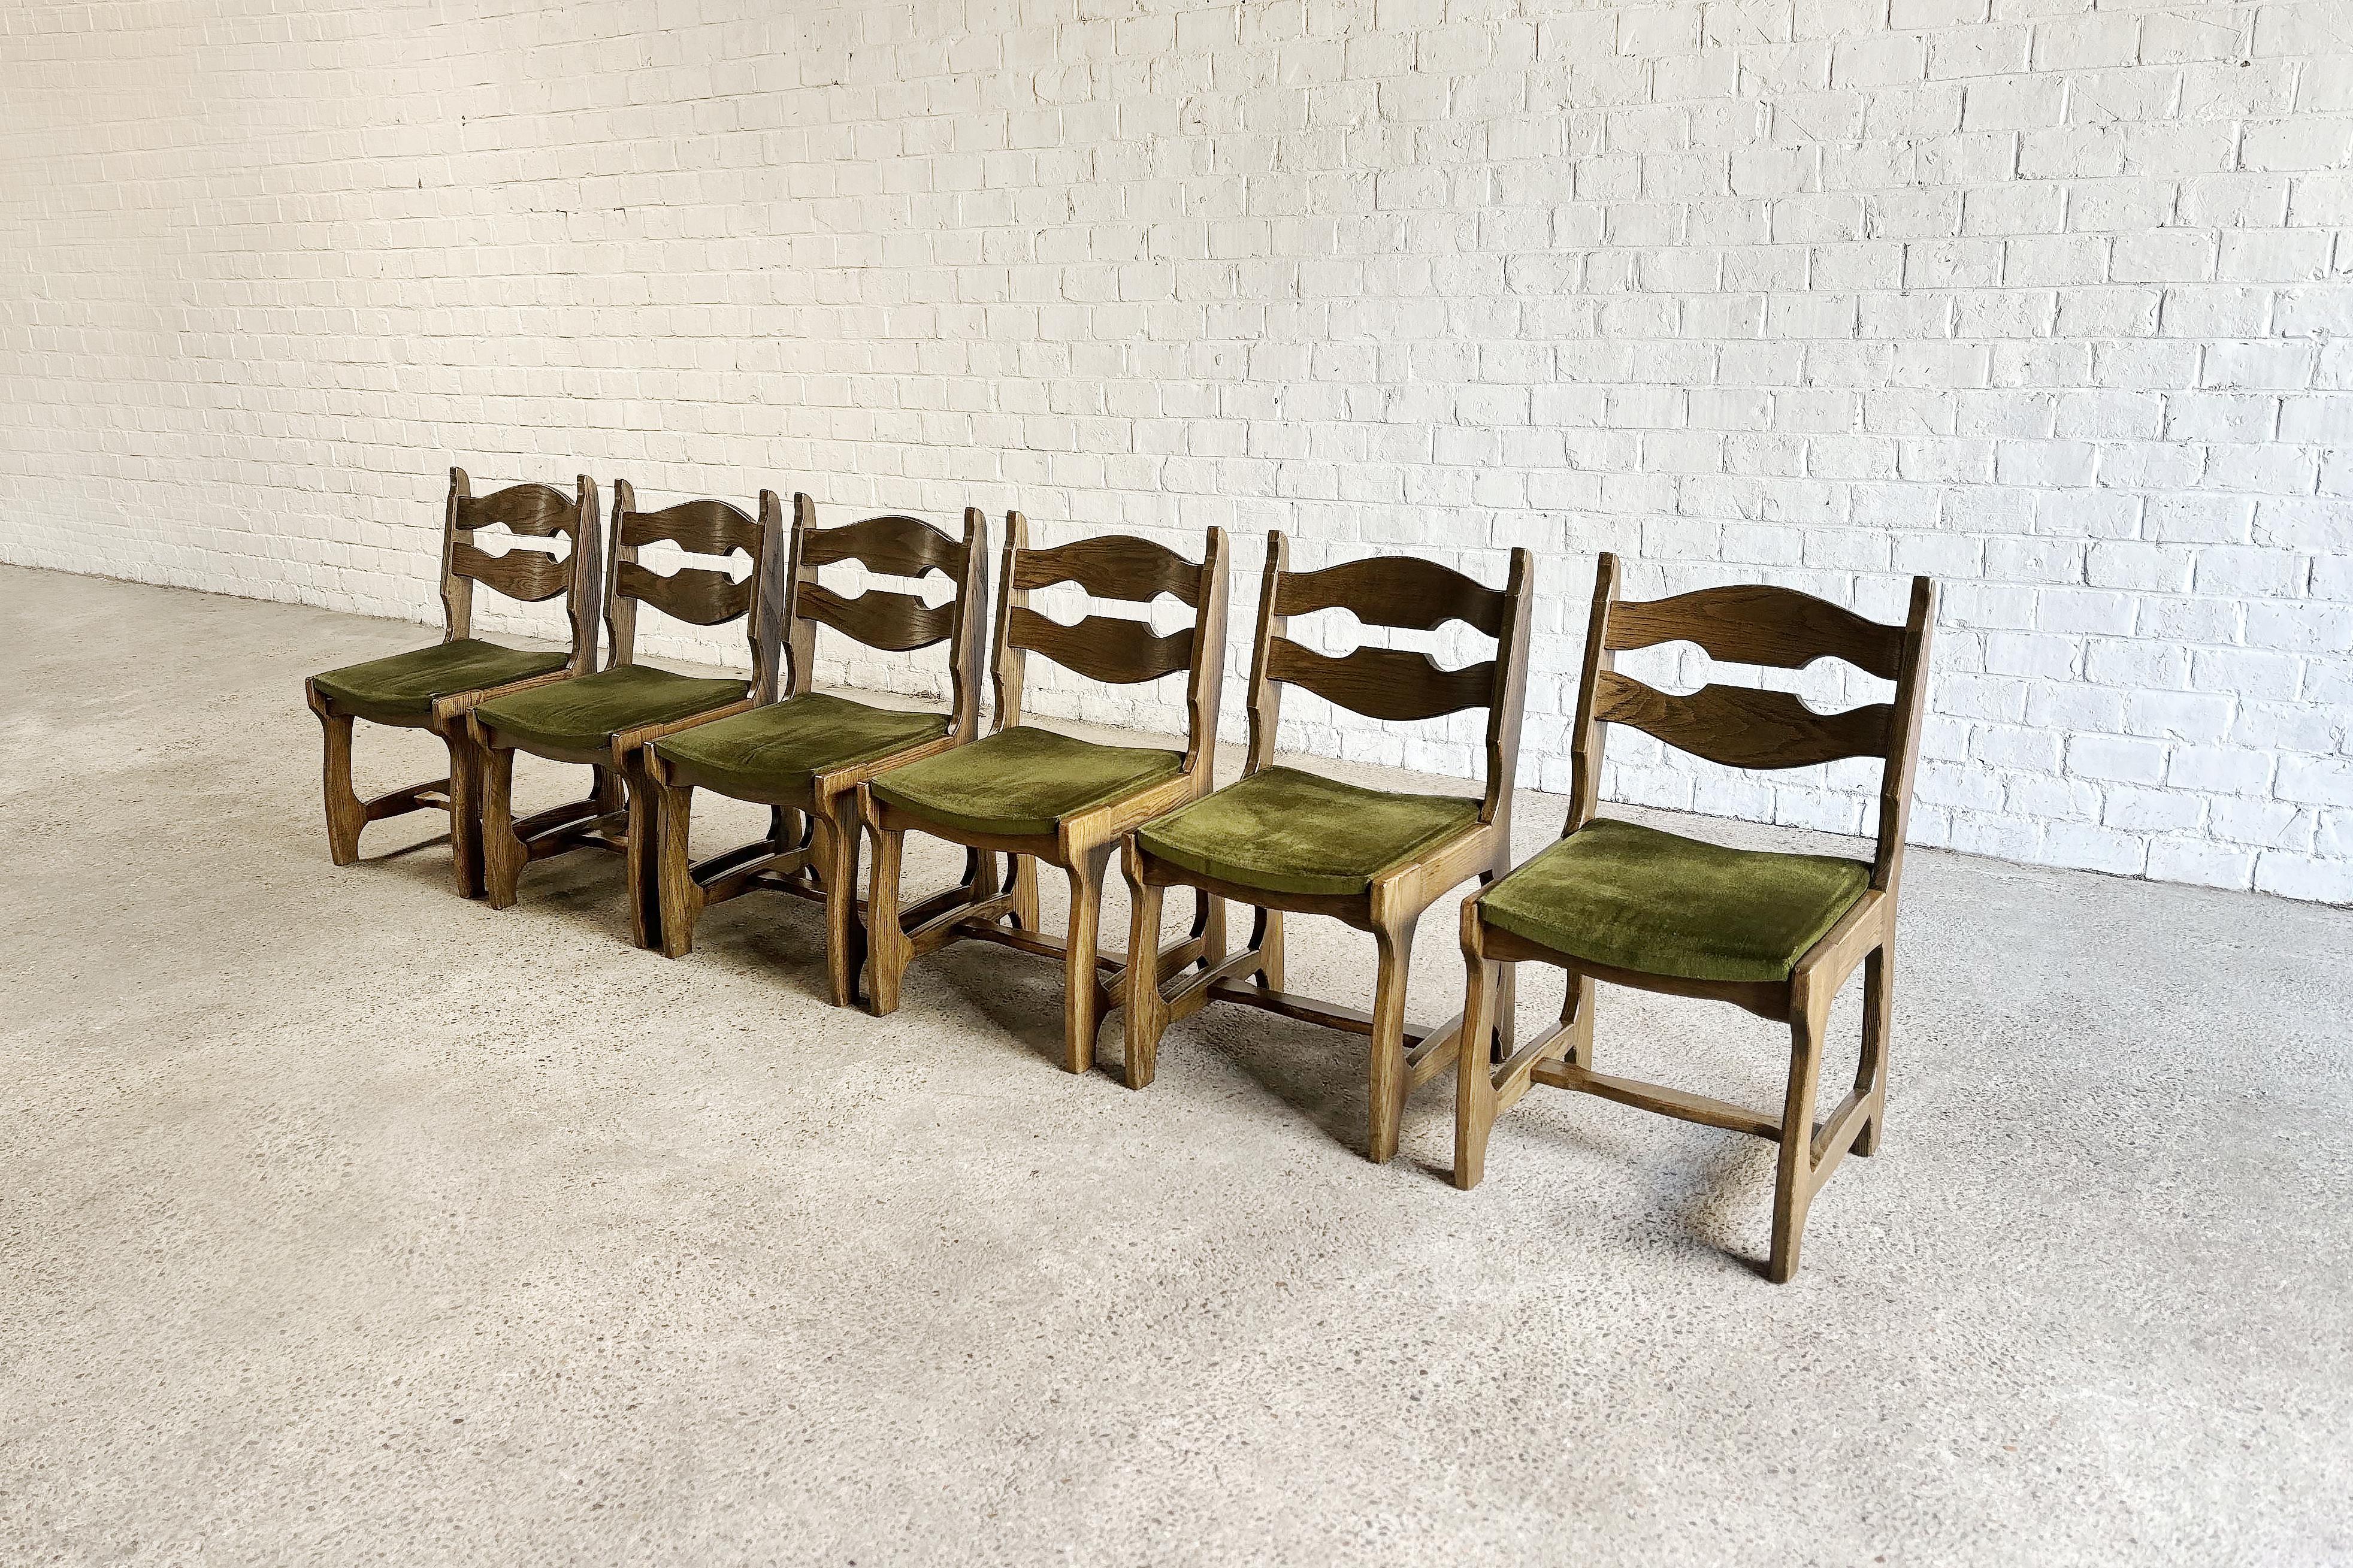 Magnificent and unusual set of 6 massive oak chairs designed by Guillerme and Chambron for Votre Maison, circa 1950. Original green velvet seats. These chairs convey a brutalist yet organic look.
